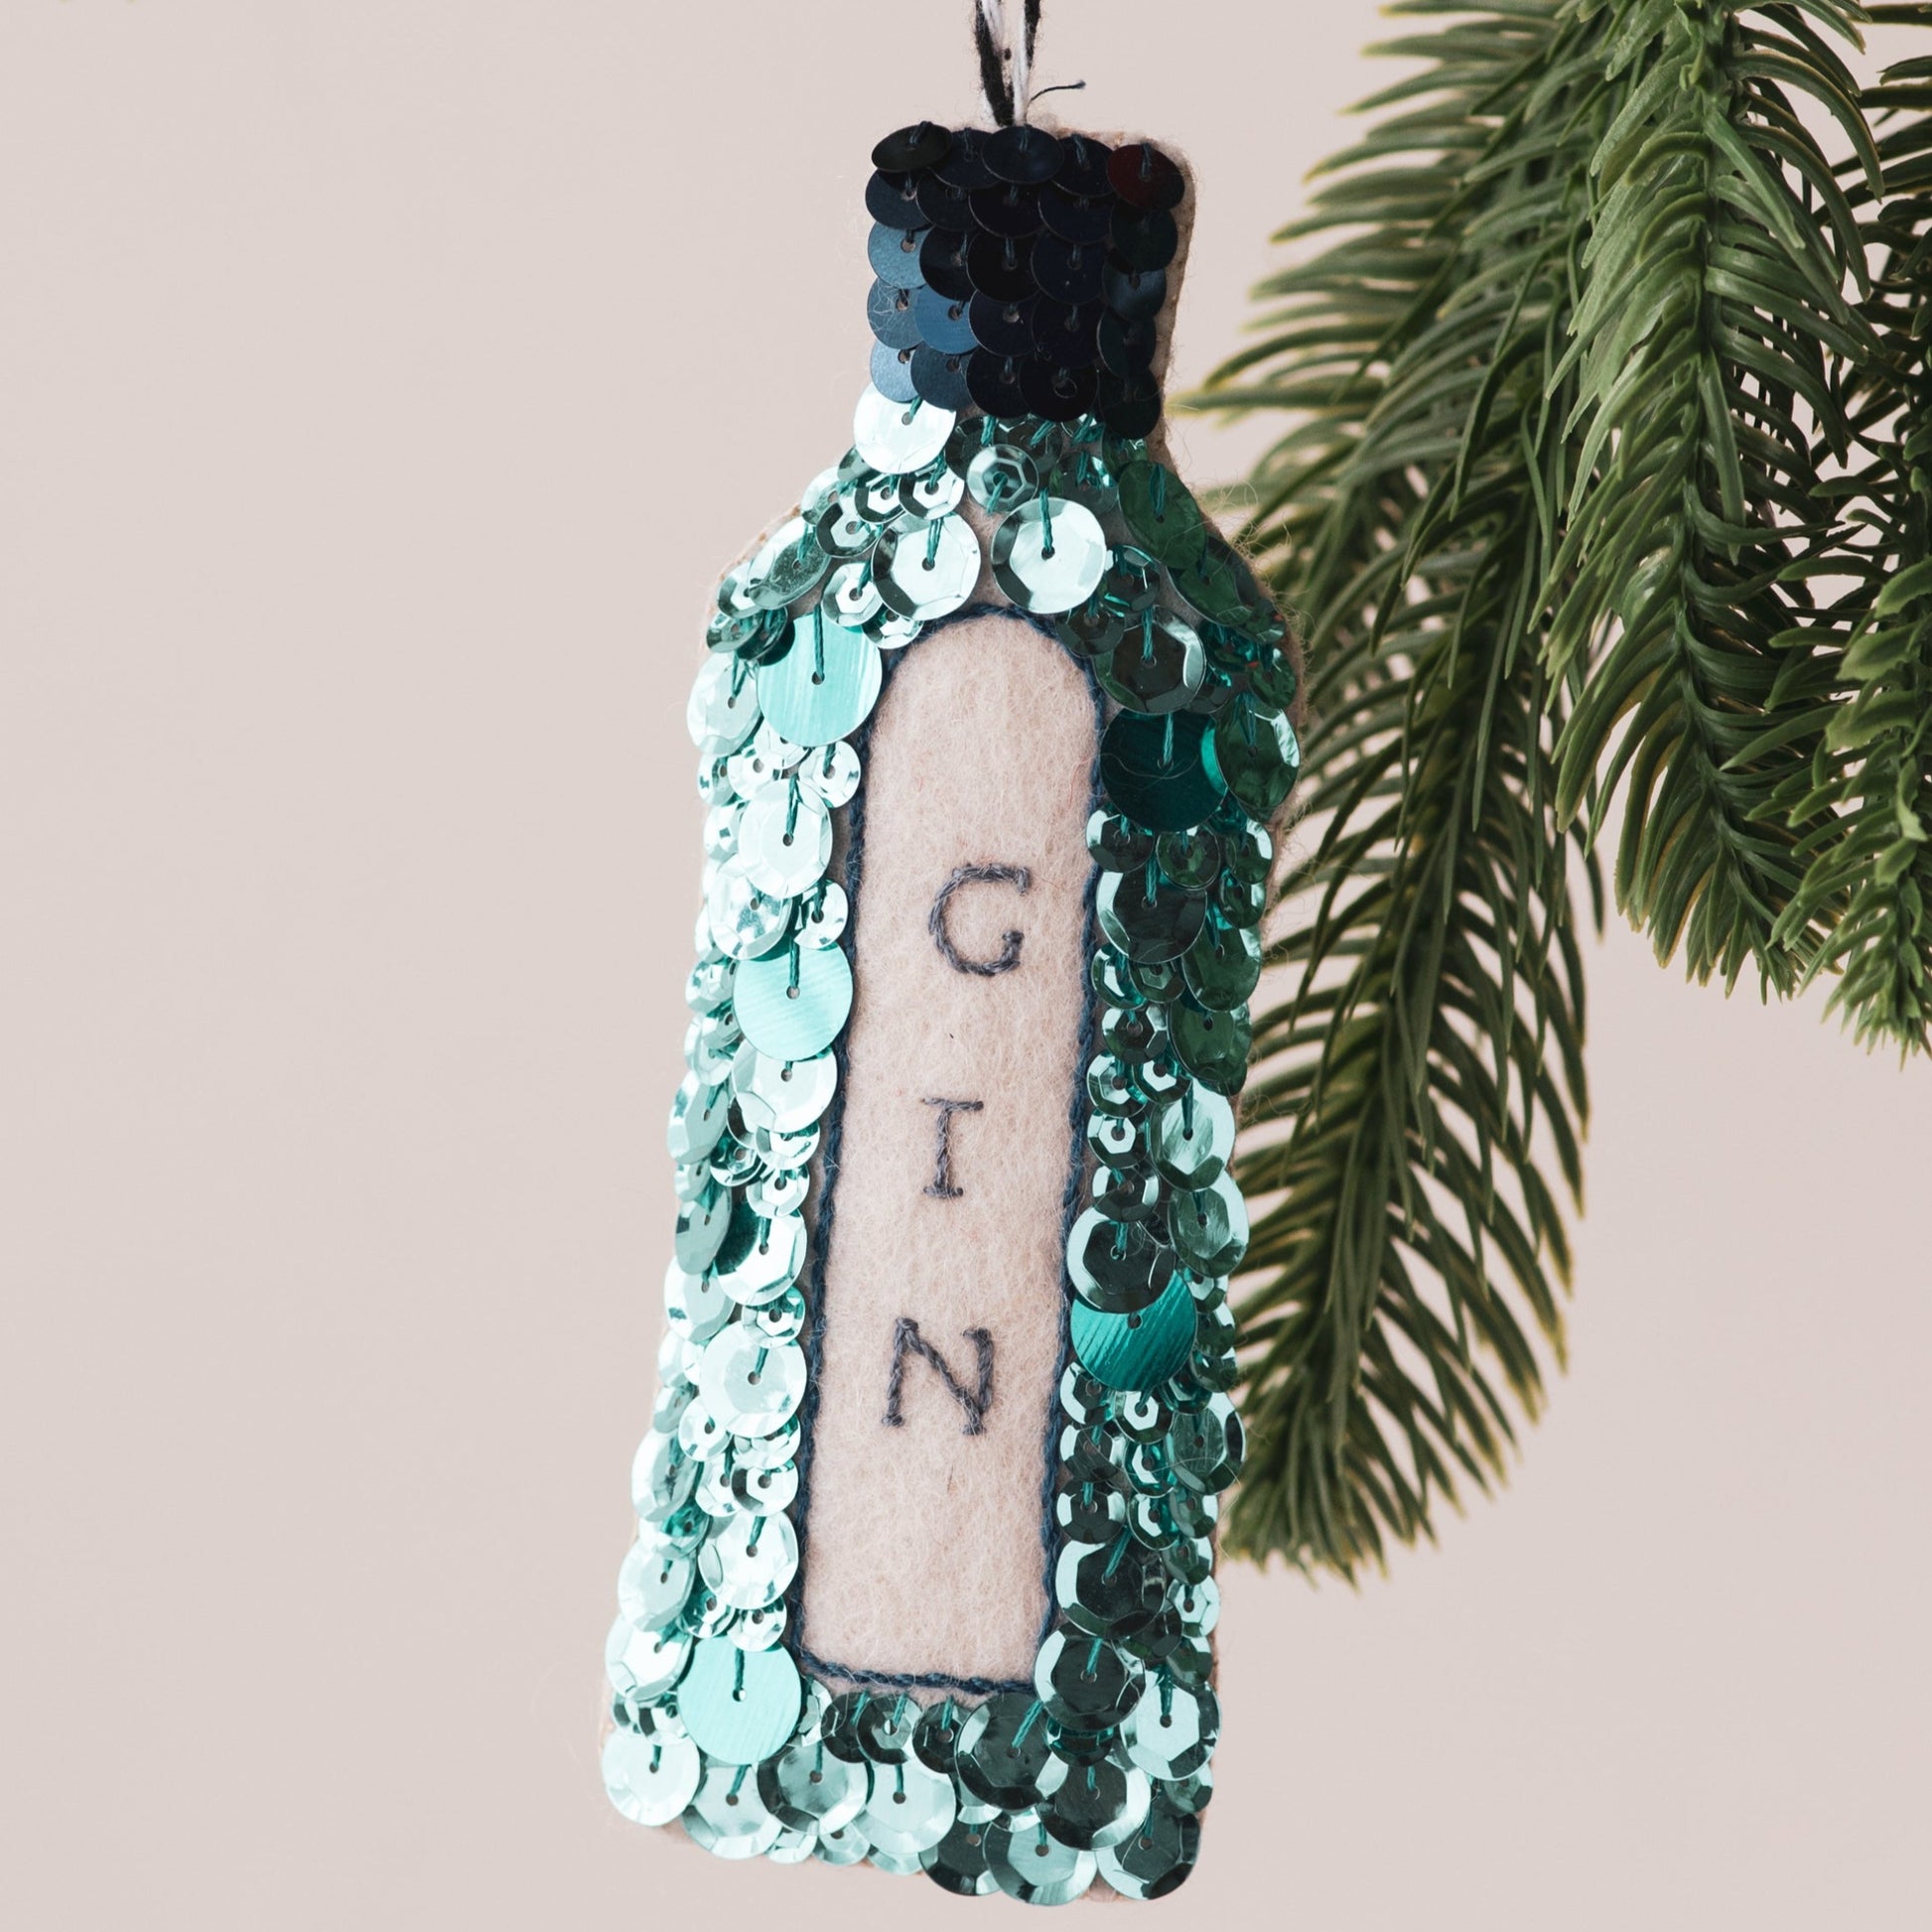 Blue Gin Sequin Hanging Ornament